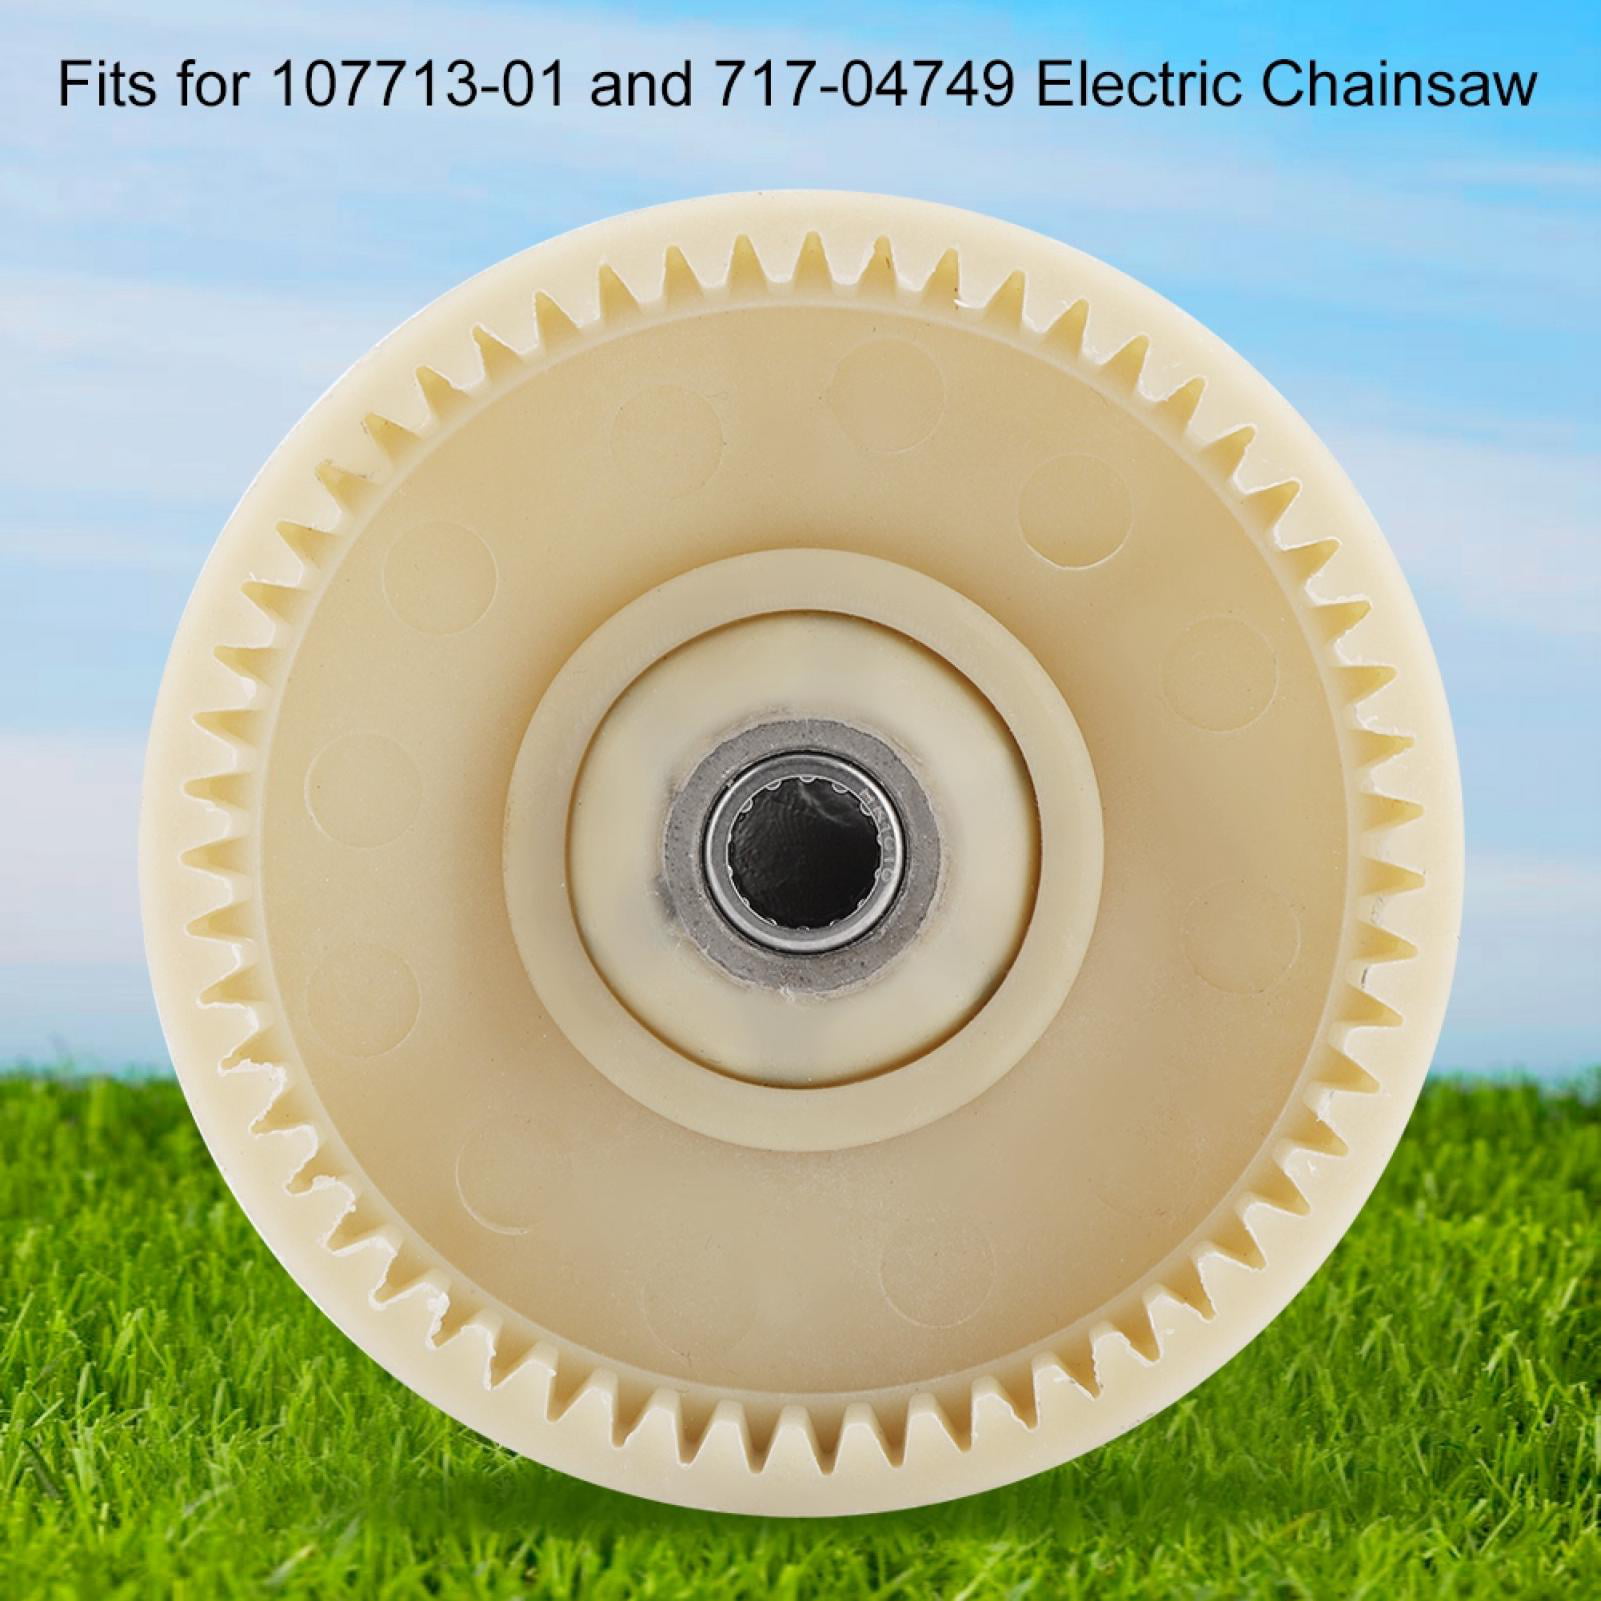 Electric Chainsaw Inner Gear Easy Install Plastic Electric Chainsaw Drive Sturdy Inner Gear for 107713-01 and 717-04749 Product